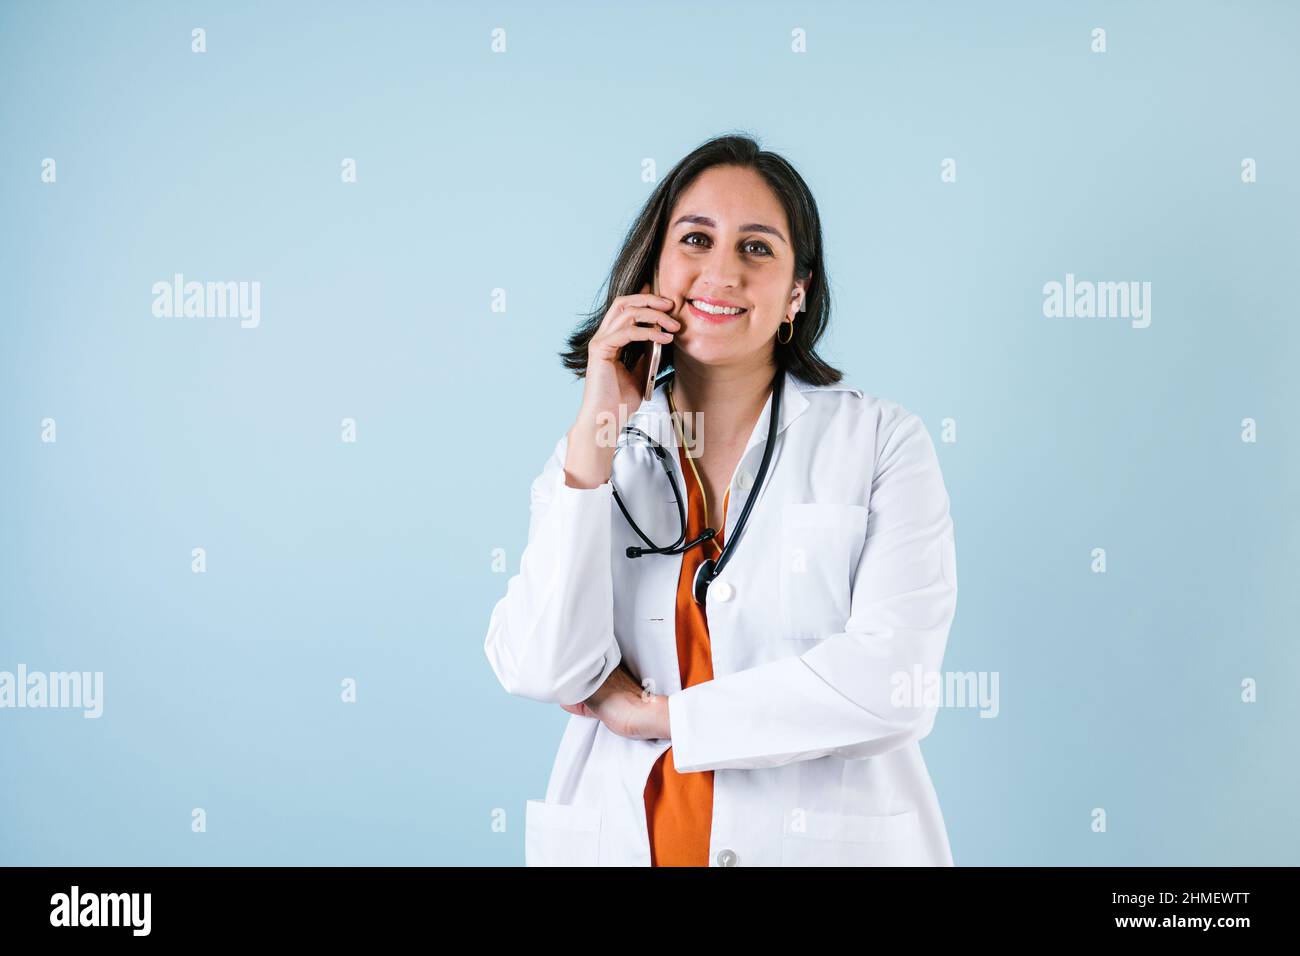 latin doctor woman holding mobile phone over blue background laughing in Mexico Latin America Stock Photo